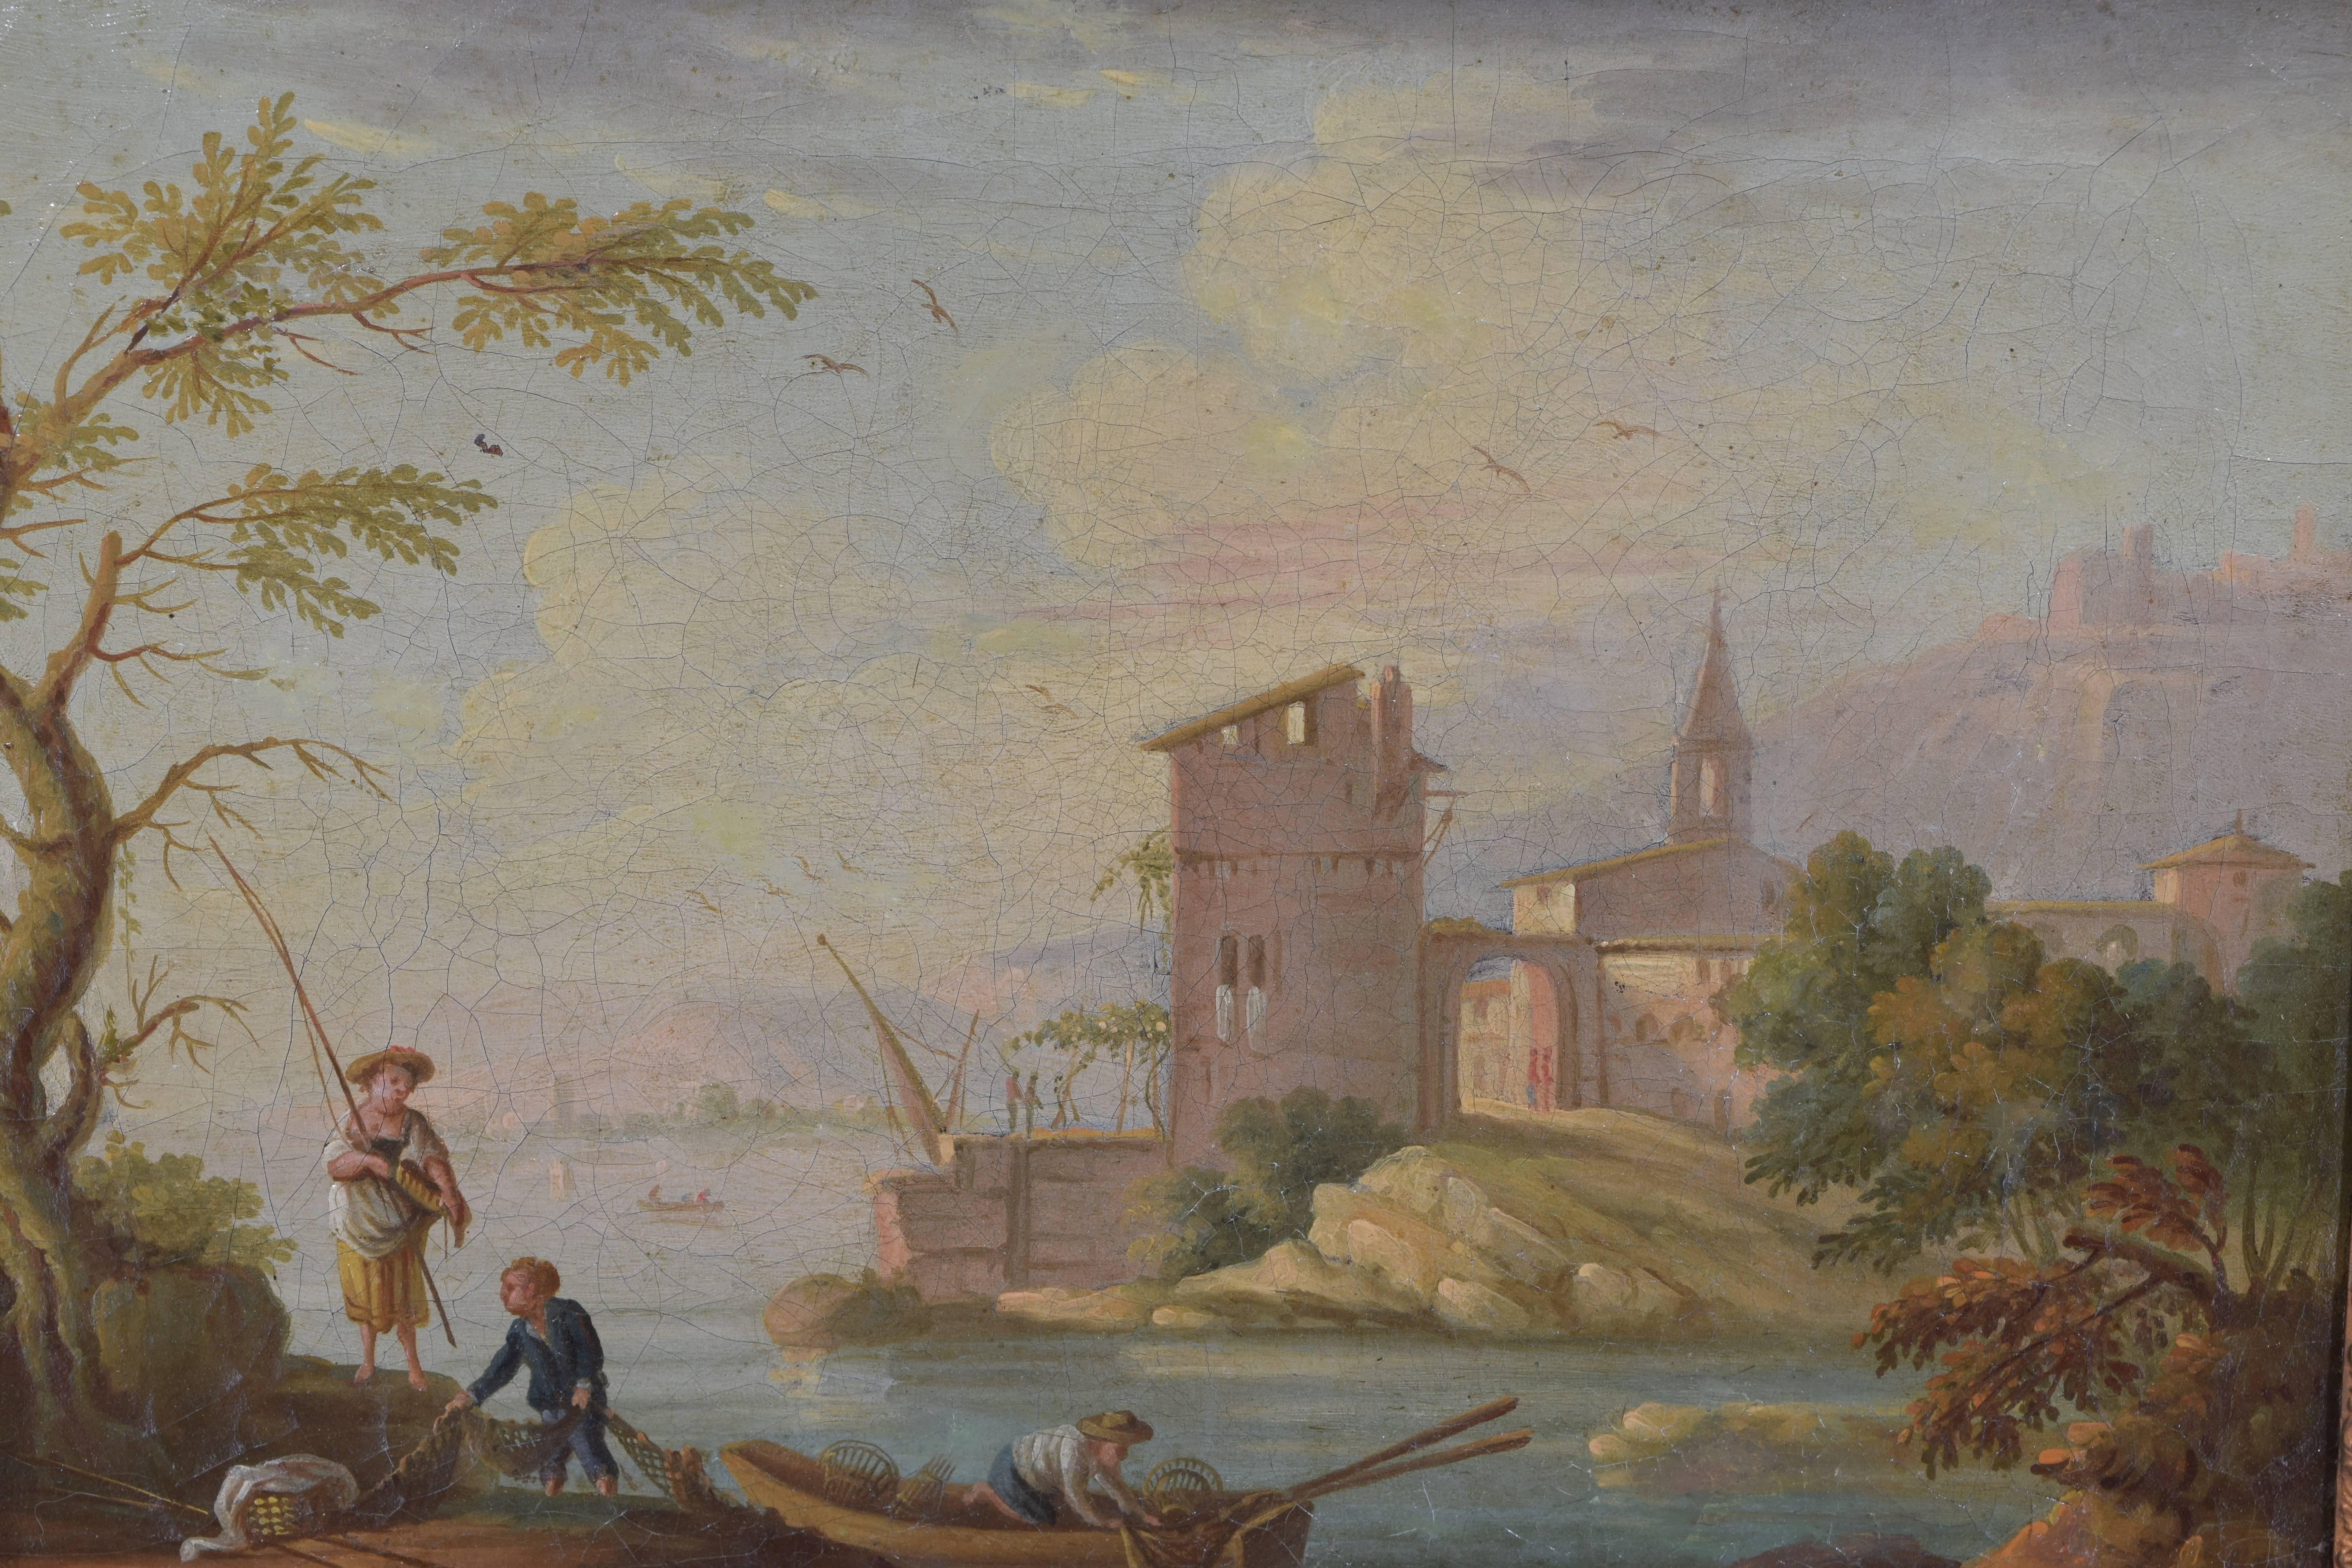 The beautifully painted scene with a village in the background and a fishing party in the foreground, in a period giltwood frame, second quarter of the 19th century.